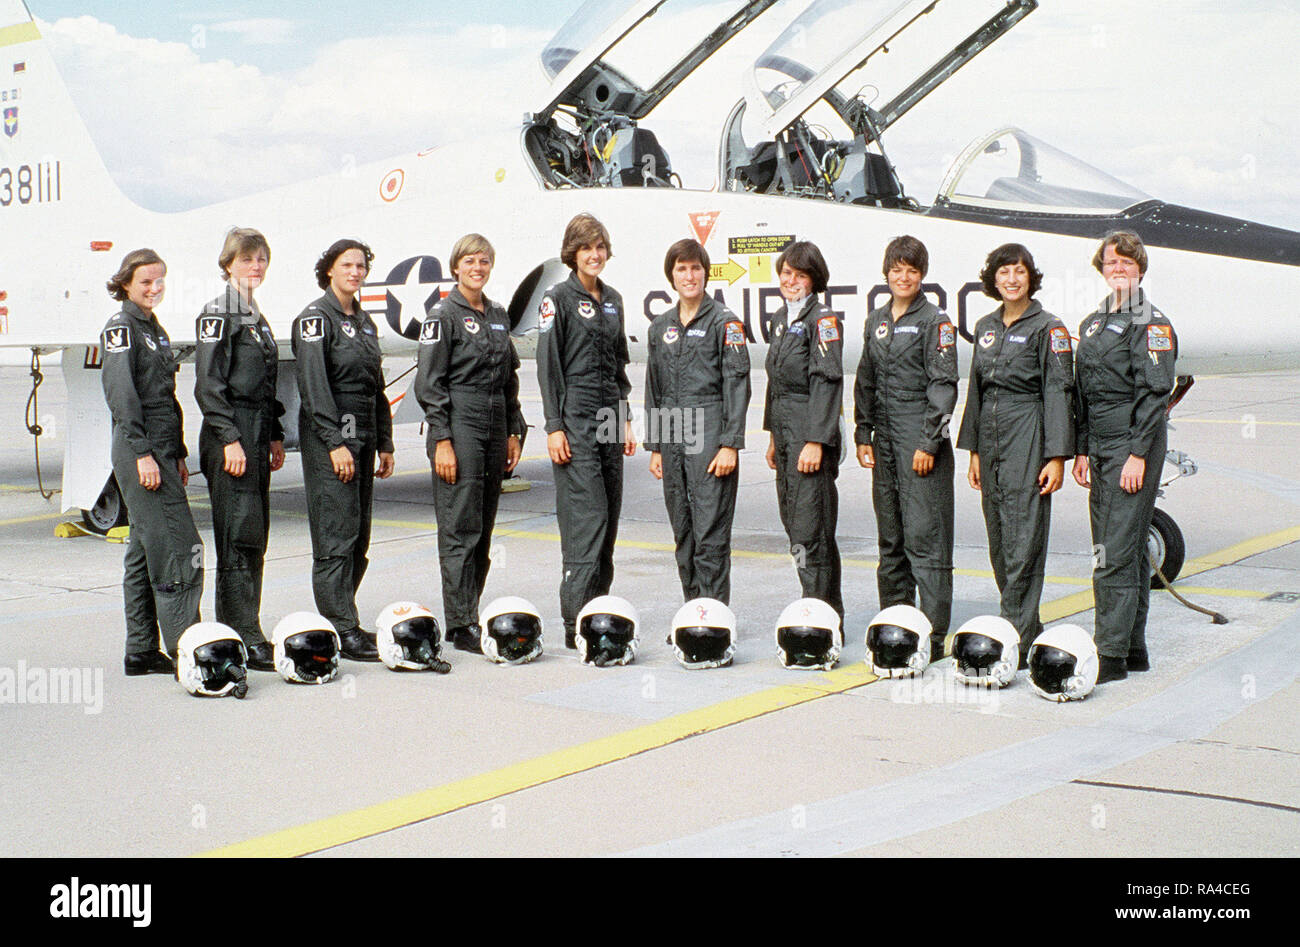 1977 - The first 10 female officers to graduate from the Air Force Undergraduate Pilot Training Program pose for a group photo in front of a T-38 training aircraft. Stock Photo